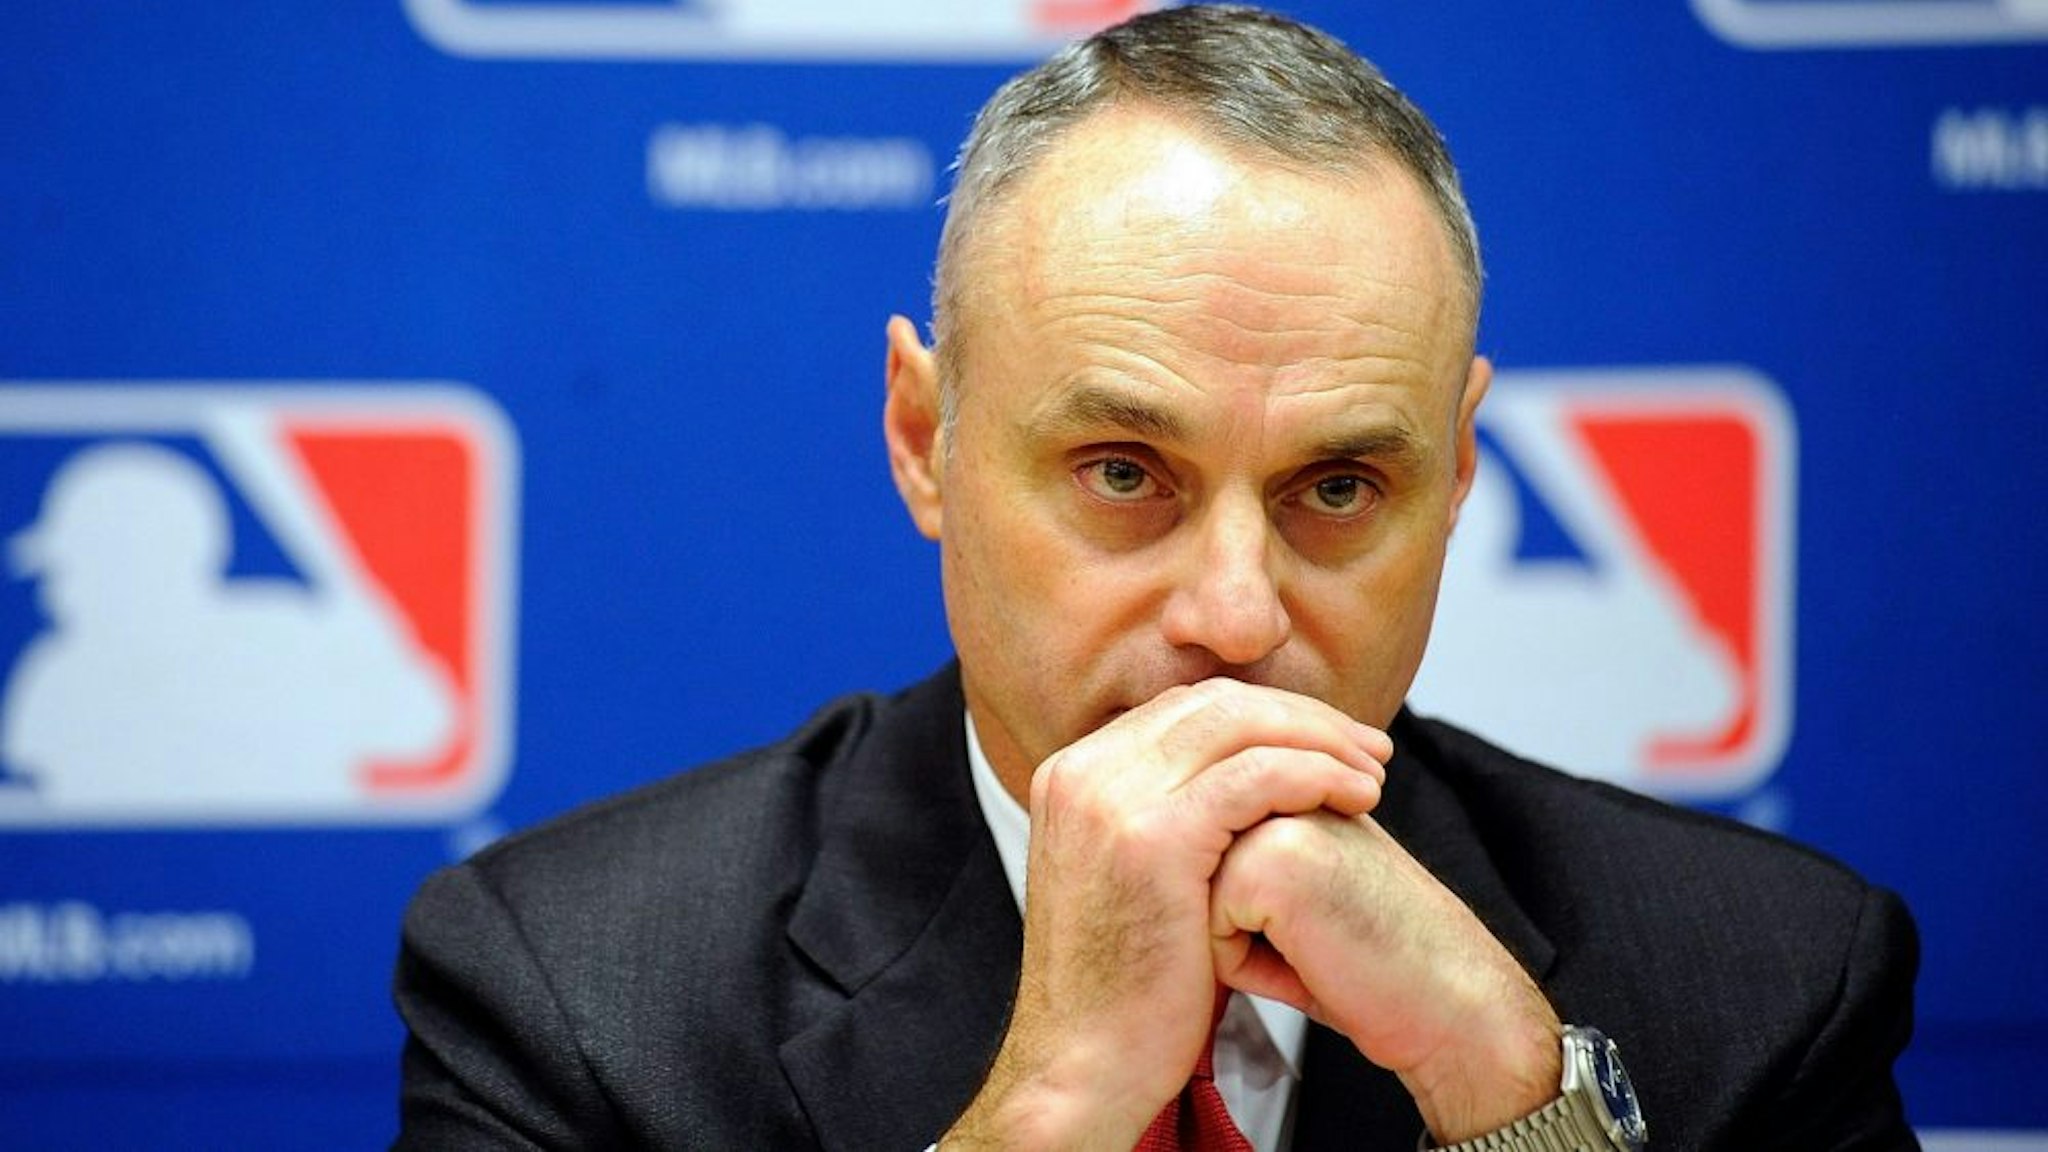 NEW YORK, NY - NOVEMBER 22: Major League Baseball Executive Vice President Rob Manfred speaks at a news conference at MLB headquarters on November 22, 2011 in New York City. Commissioner Bud Selig announced a new five-year labor agreement between Major League Baseball and the Major League Baseball Players Association.